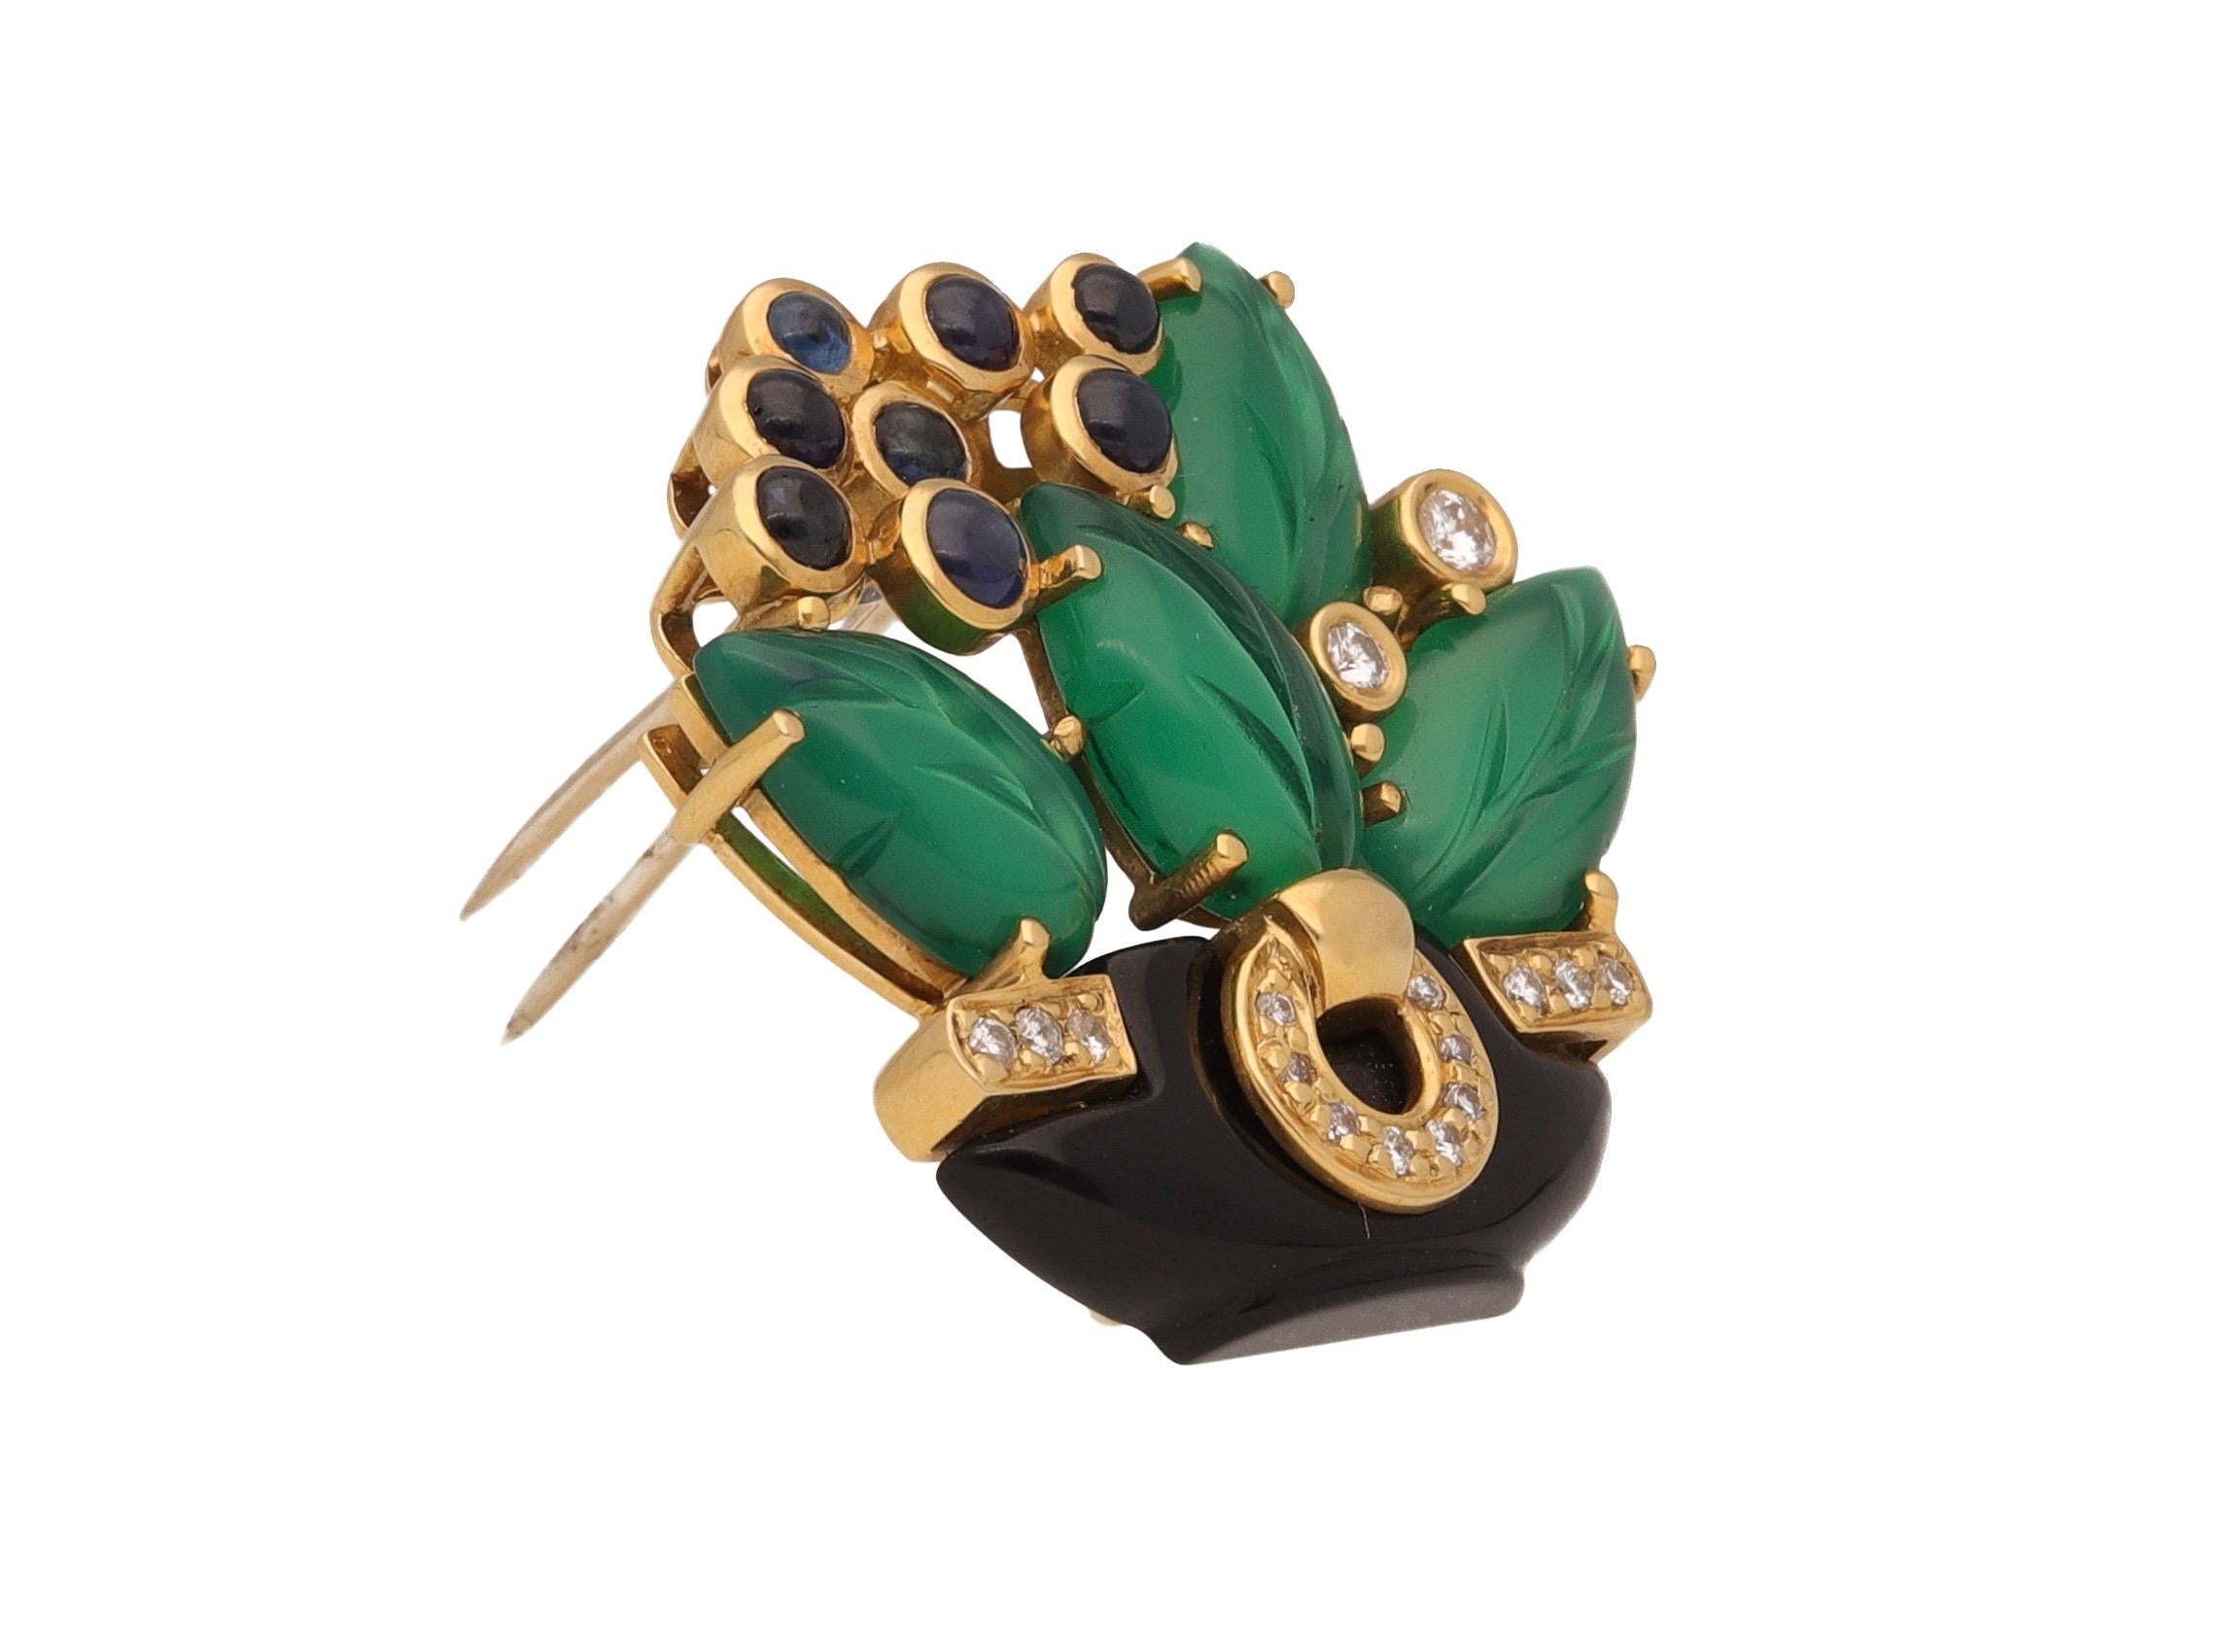 18 kt. yellow gold with diamonds, onyx, sapphires and carved Chrysophrases by Cartier.
This amazing brooch is from 1989 circa and has a typical bouquet de fleurs shape, one of the most iconic design by Cartier.
Made in France.